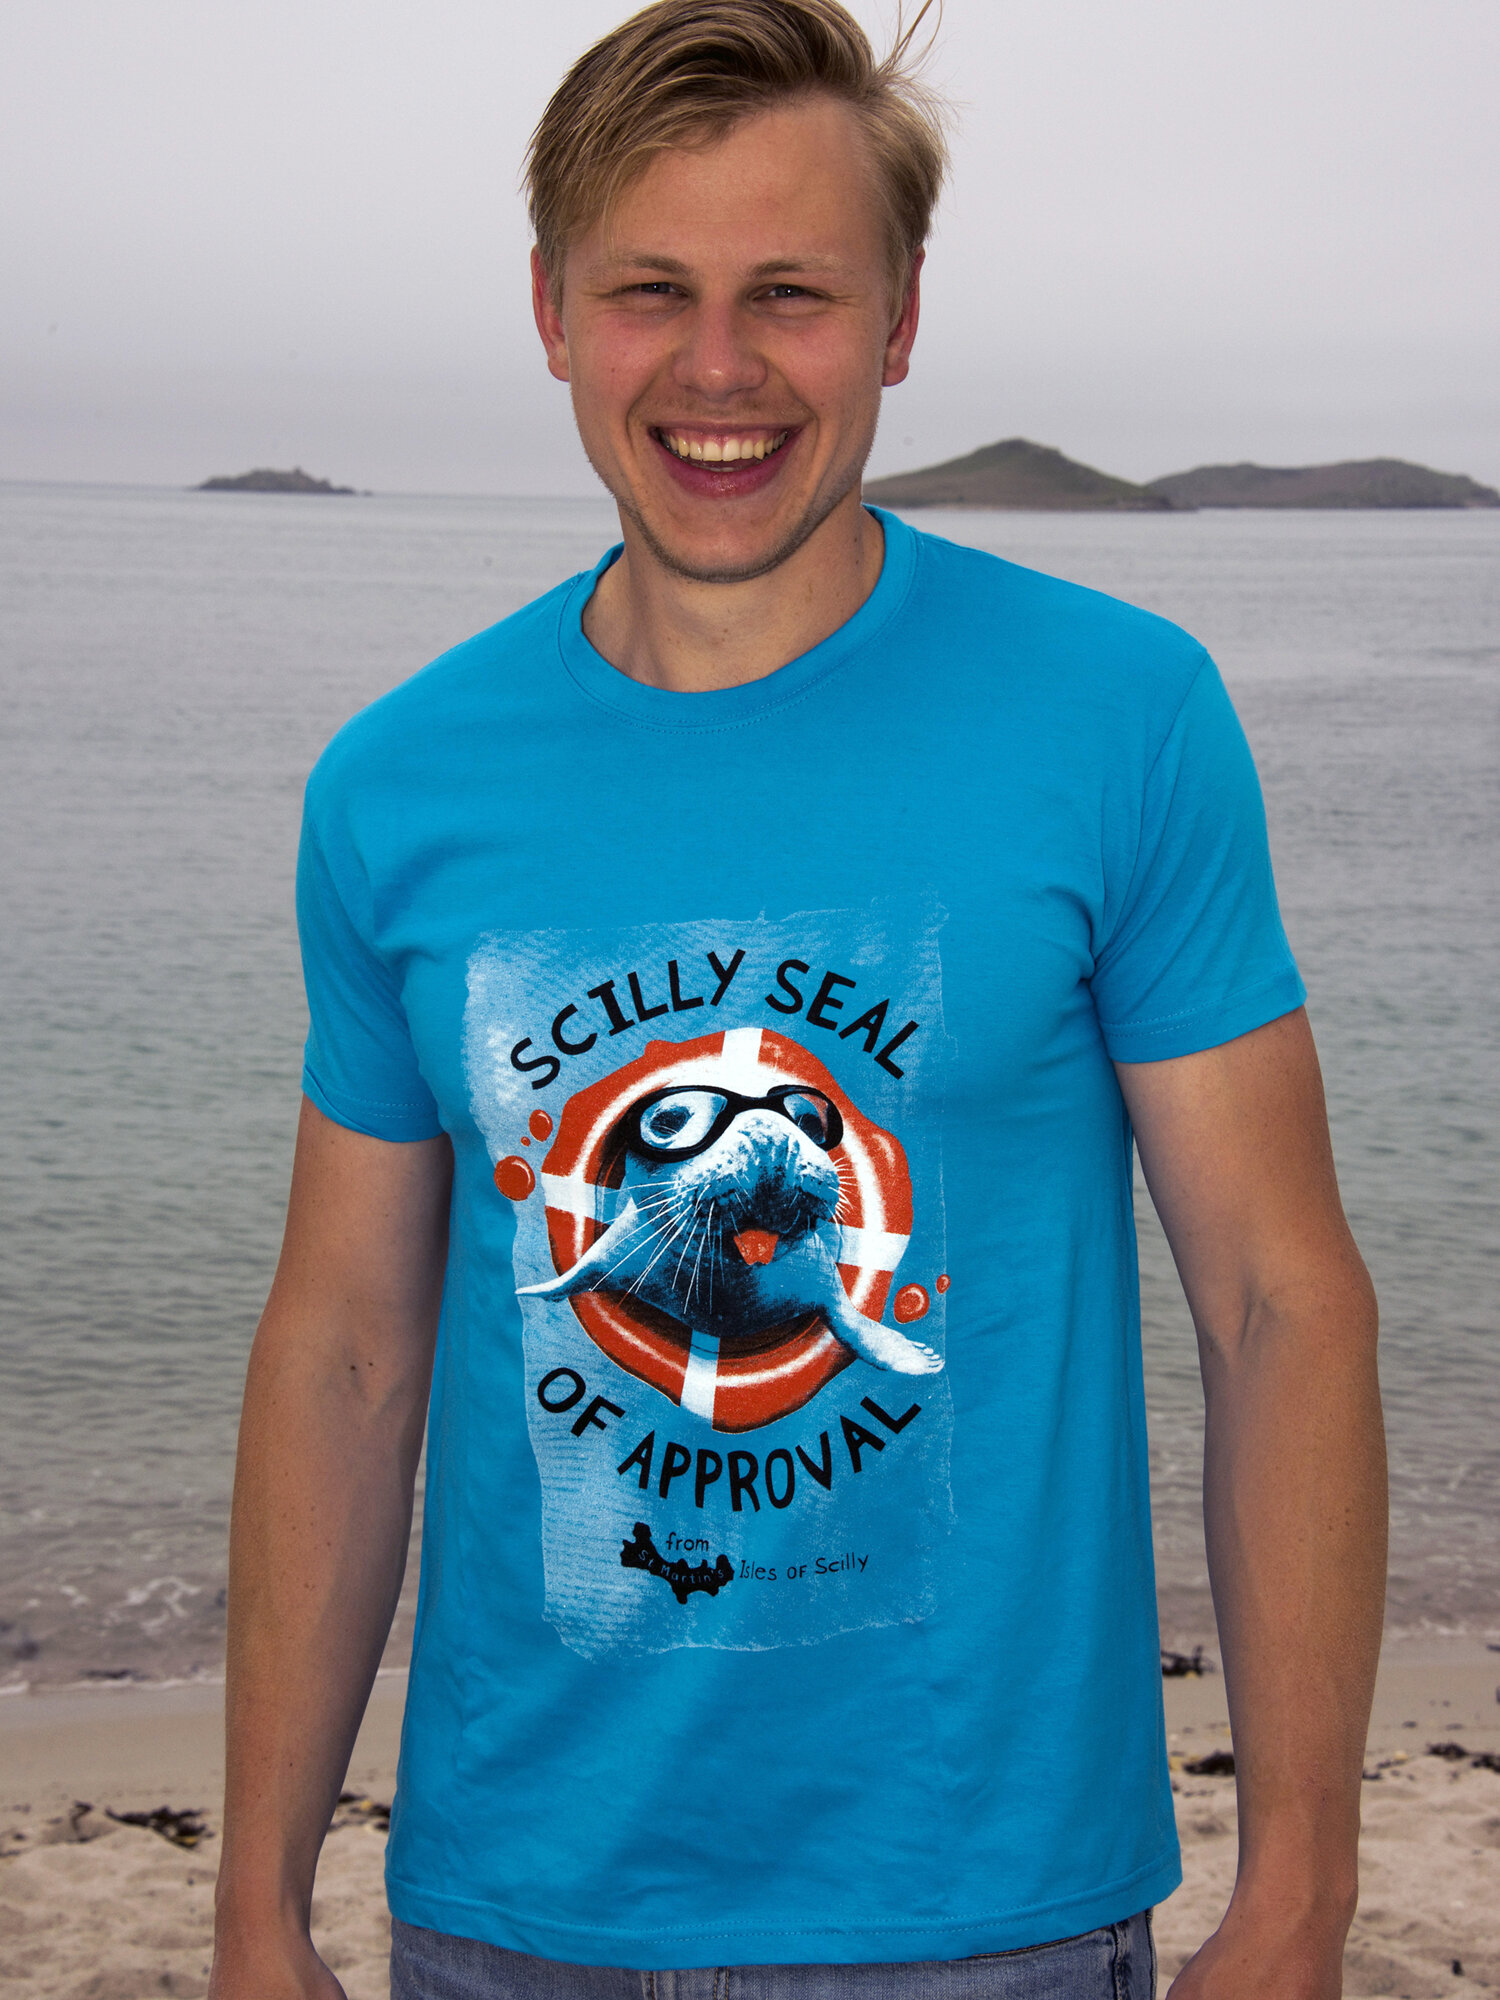 Scilly Seal of Approval Tee